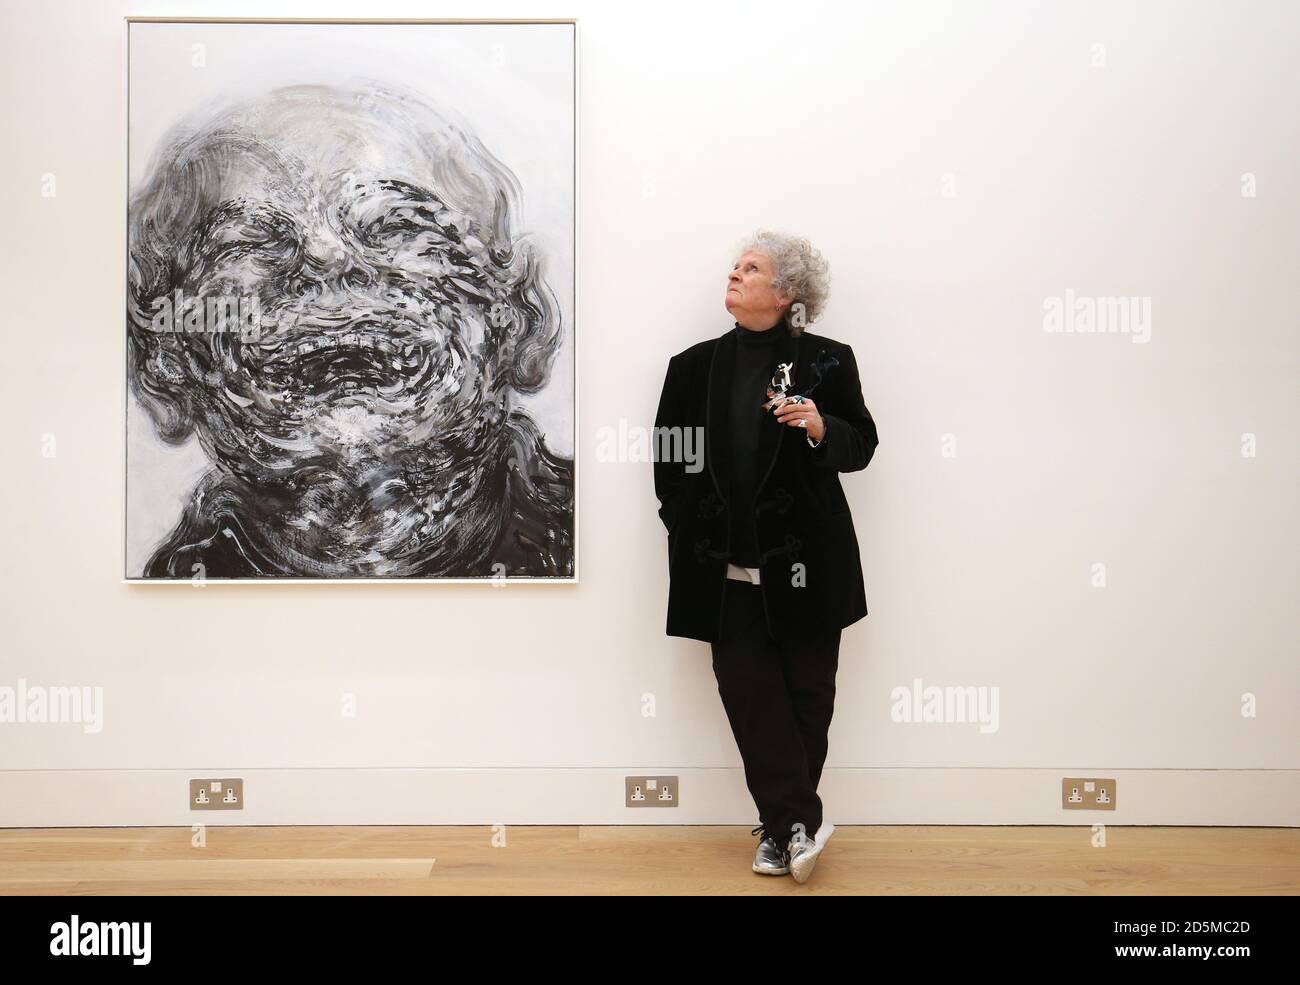 British artist Maggi Hambling stands next to her work 'Laughing' whilst attending her new exhibition at the Marlborough Gallery, London. Stock Photo